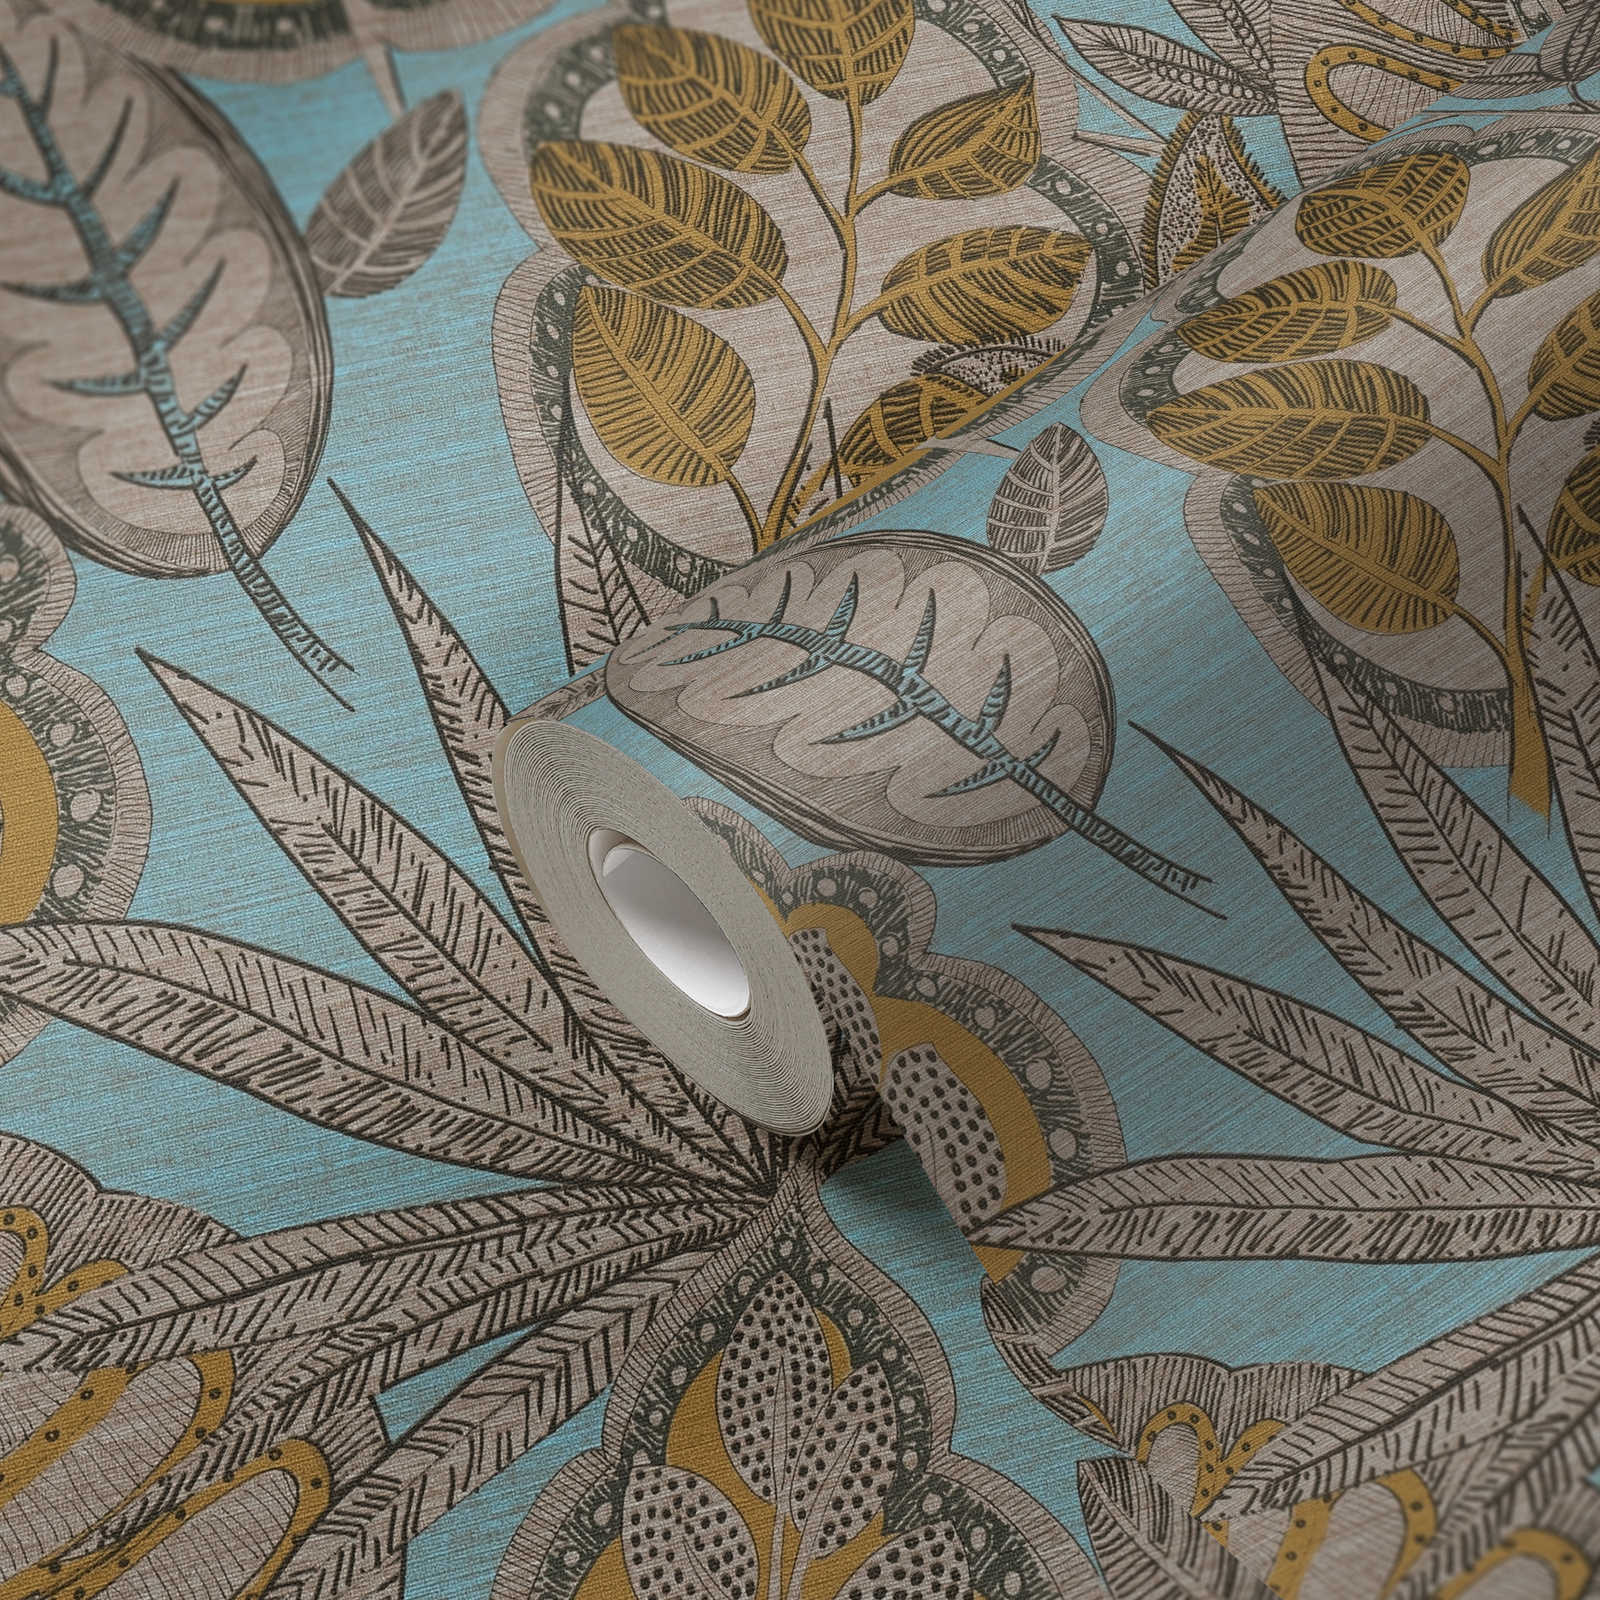             Floral non-woven wallpaper in graphic style with light structure, matt - light blue, yellow, brown
        